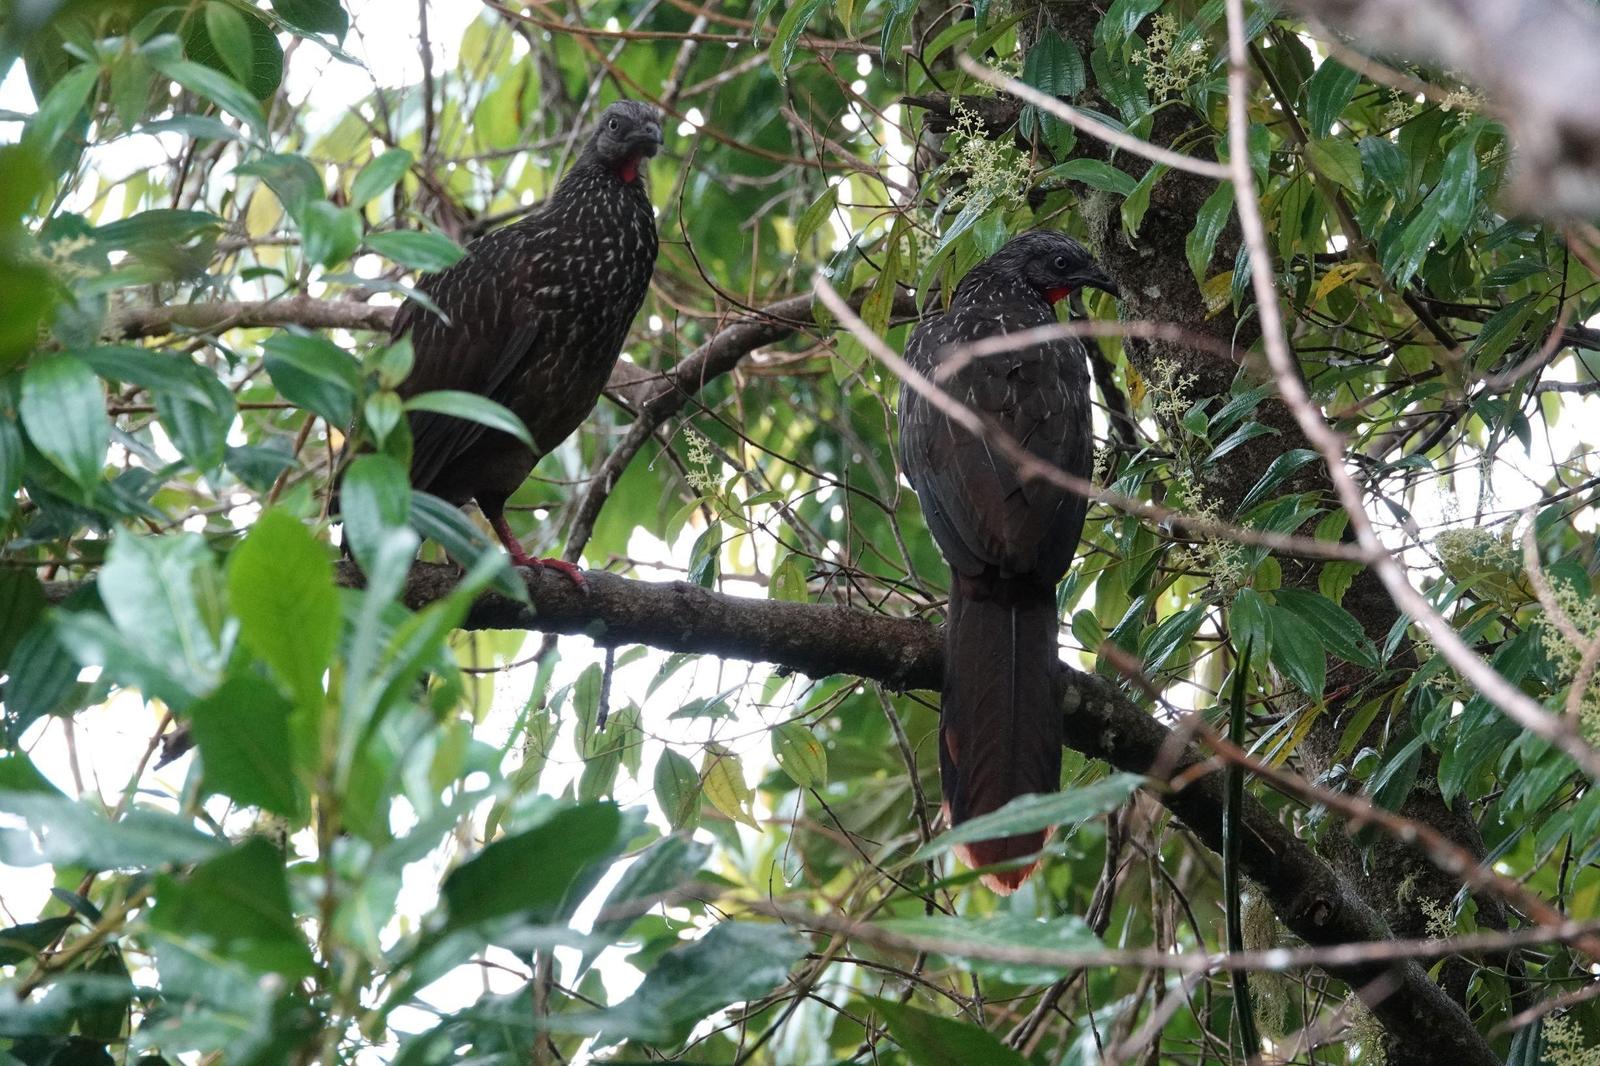 Band-tailed Guan Photo by Bonnie Clarfield-Bylin